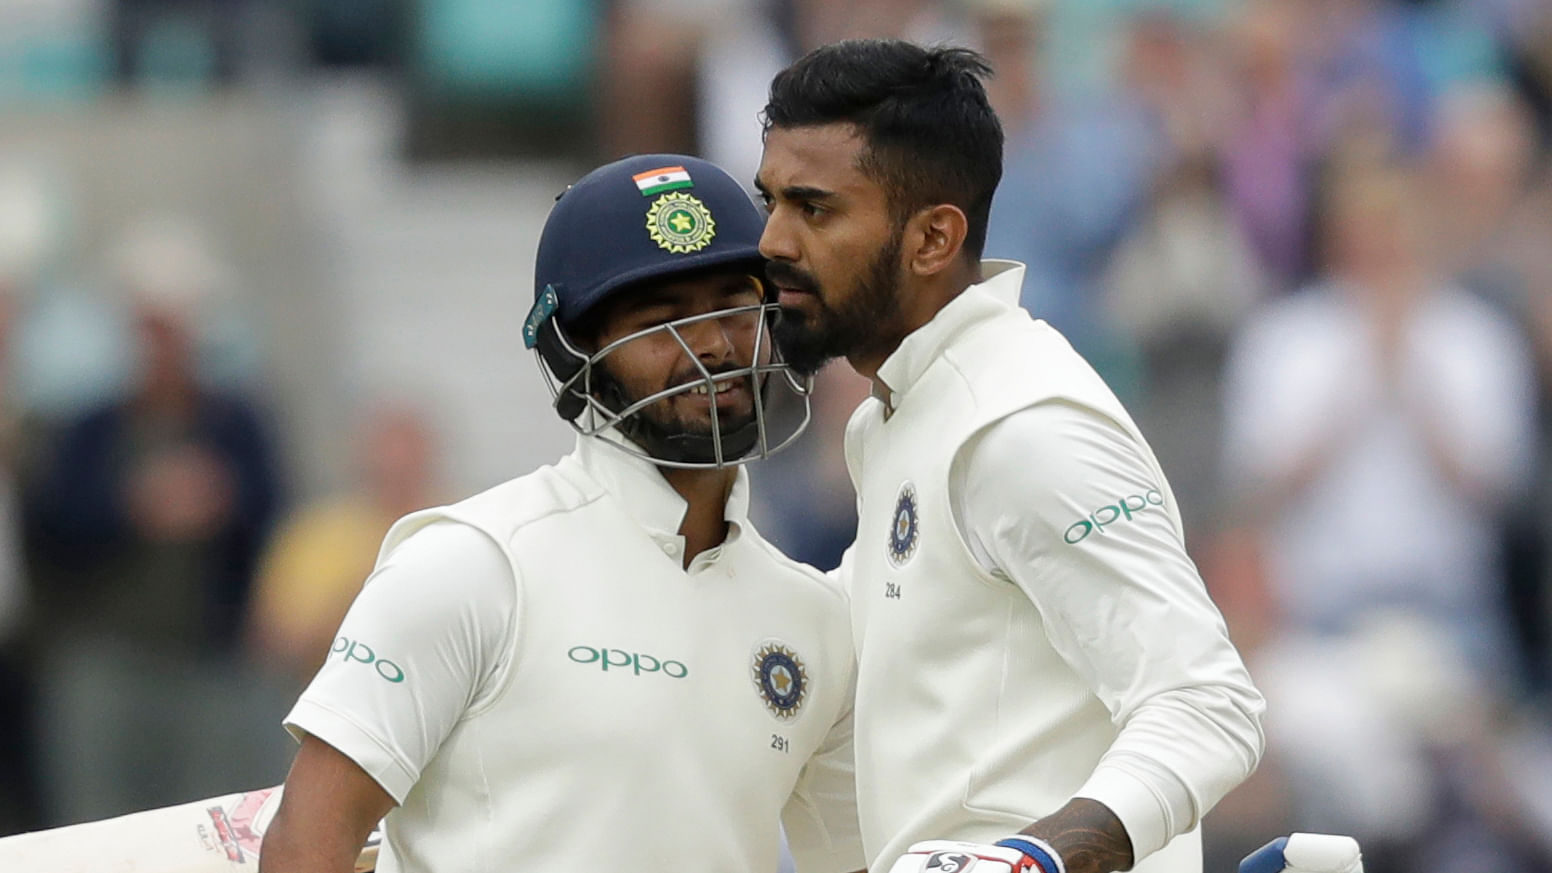 Rishabh Pant and KL Rahul added 204 runs for the sixth wicket in the fifth Test against England.